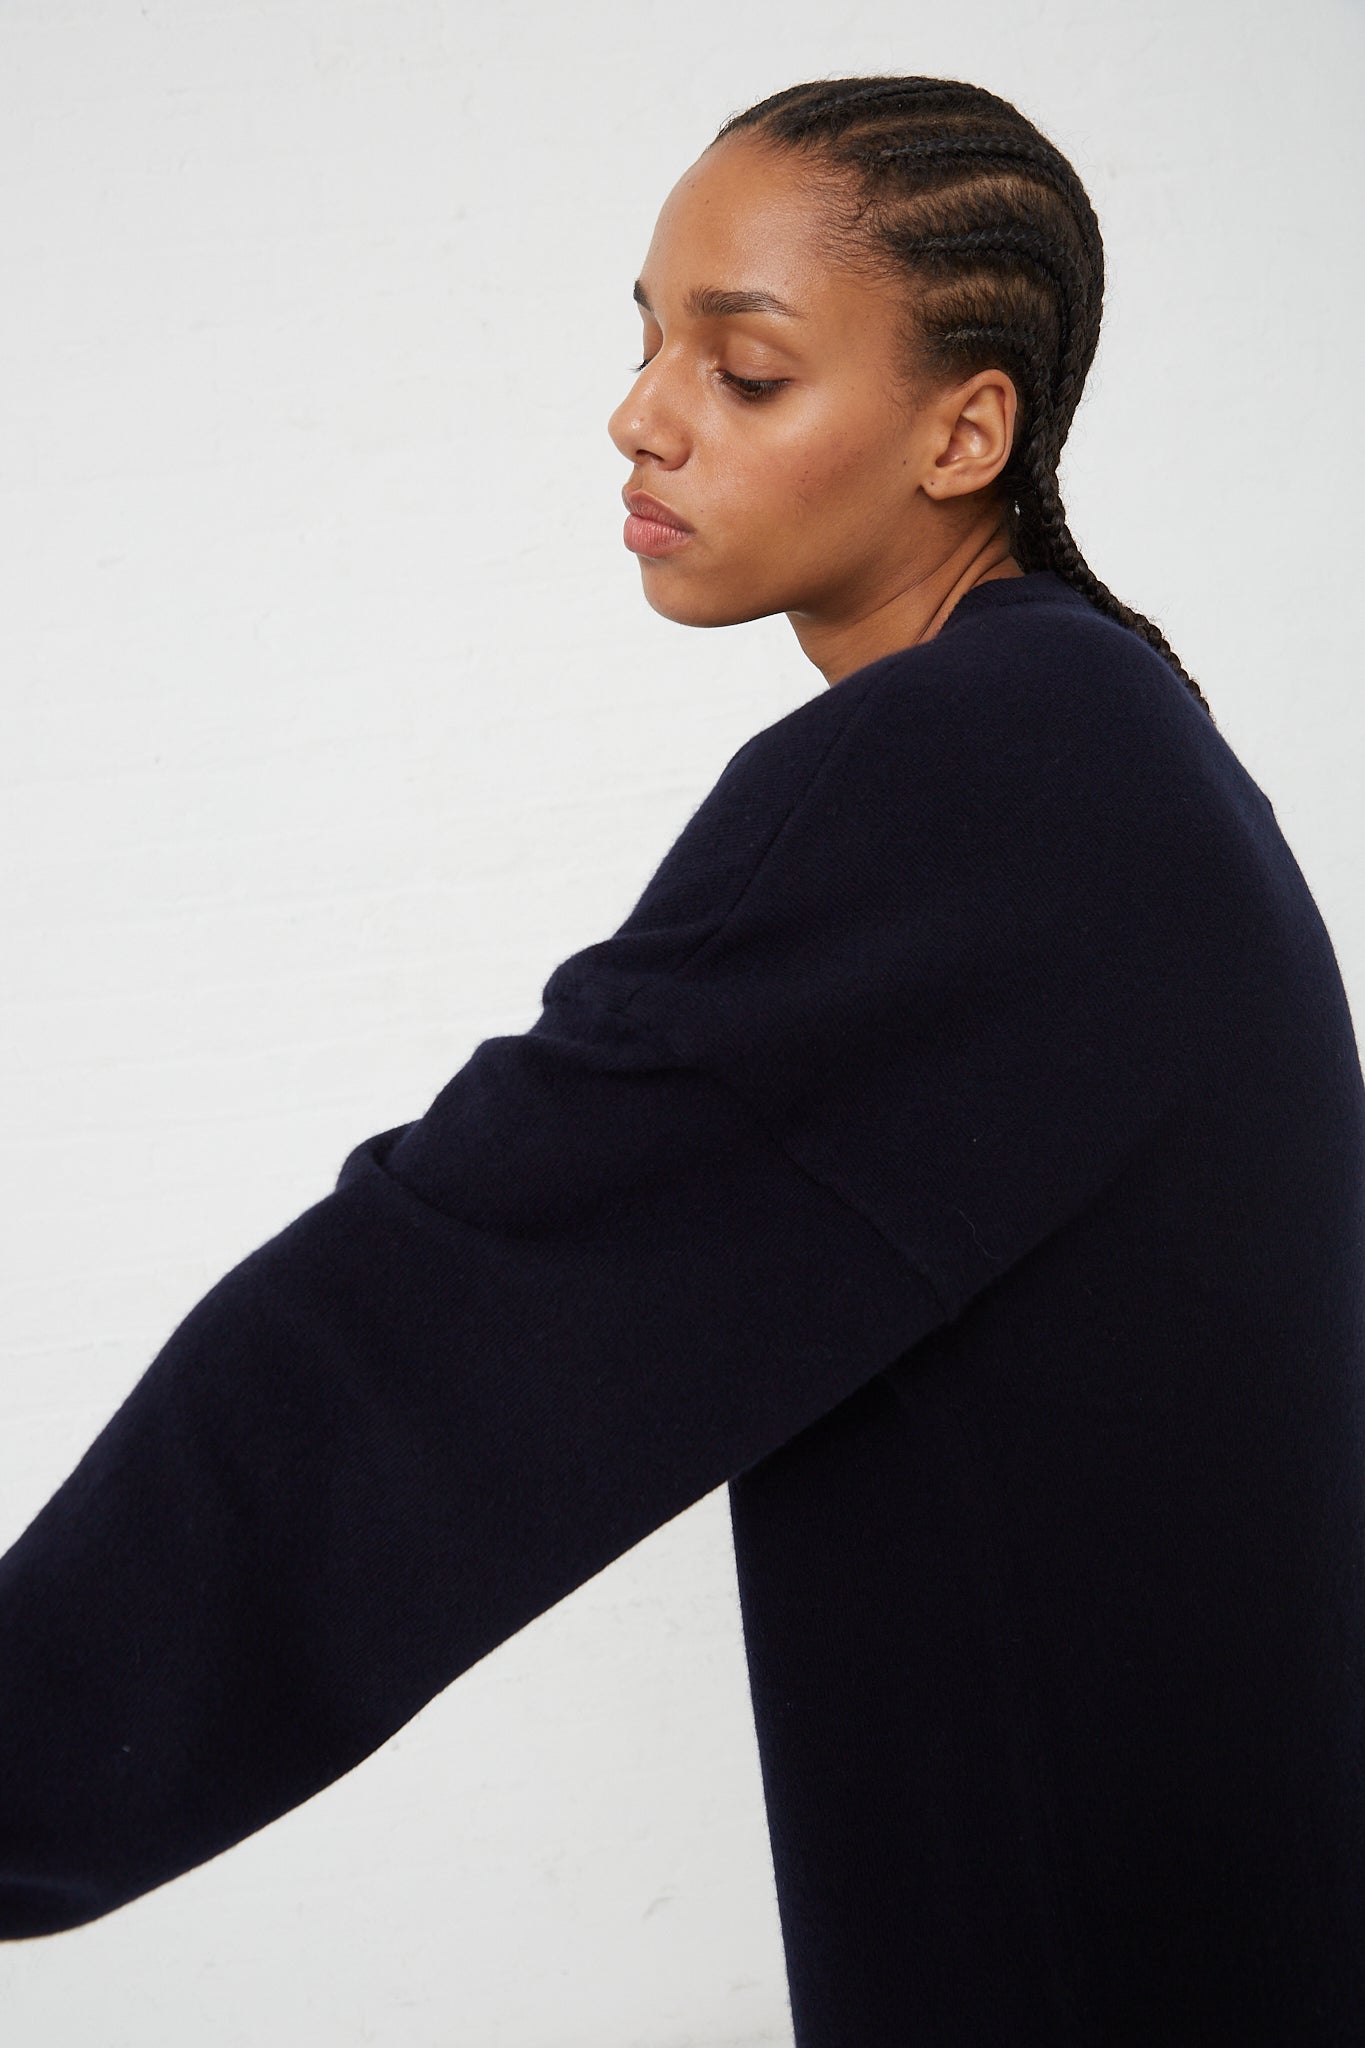 The model is wearing a Extreme Cashmere No. 106 Weird Dress in Navy with long sleeves.